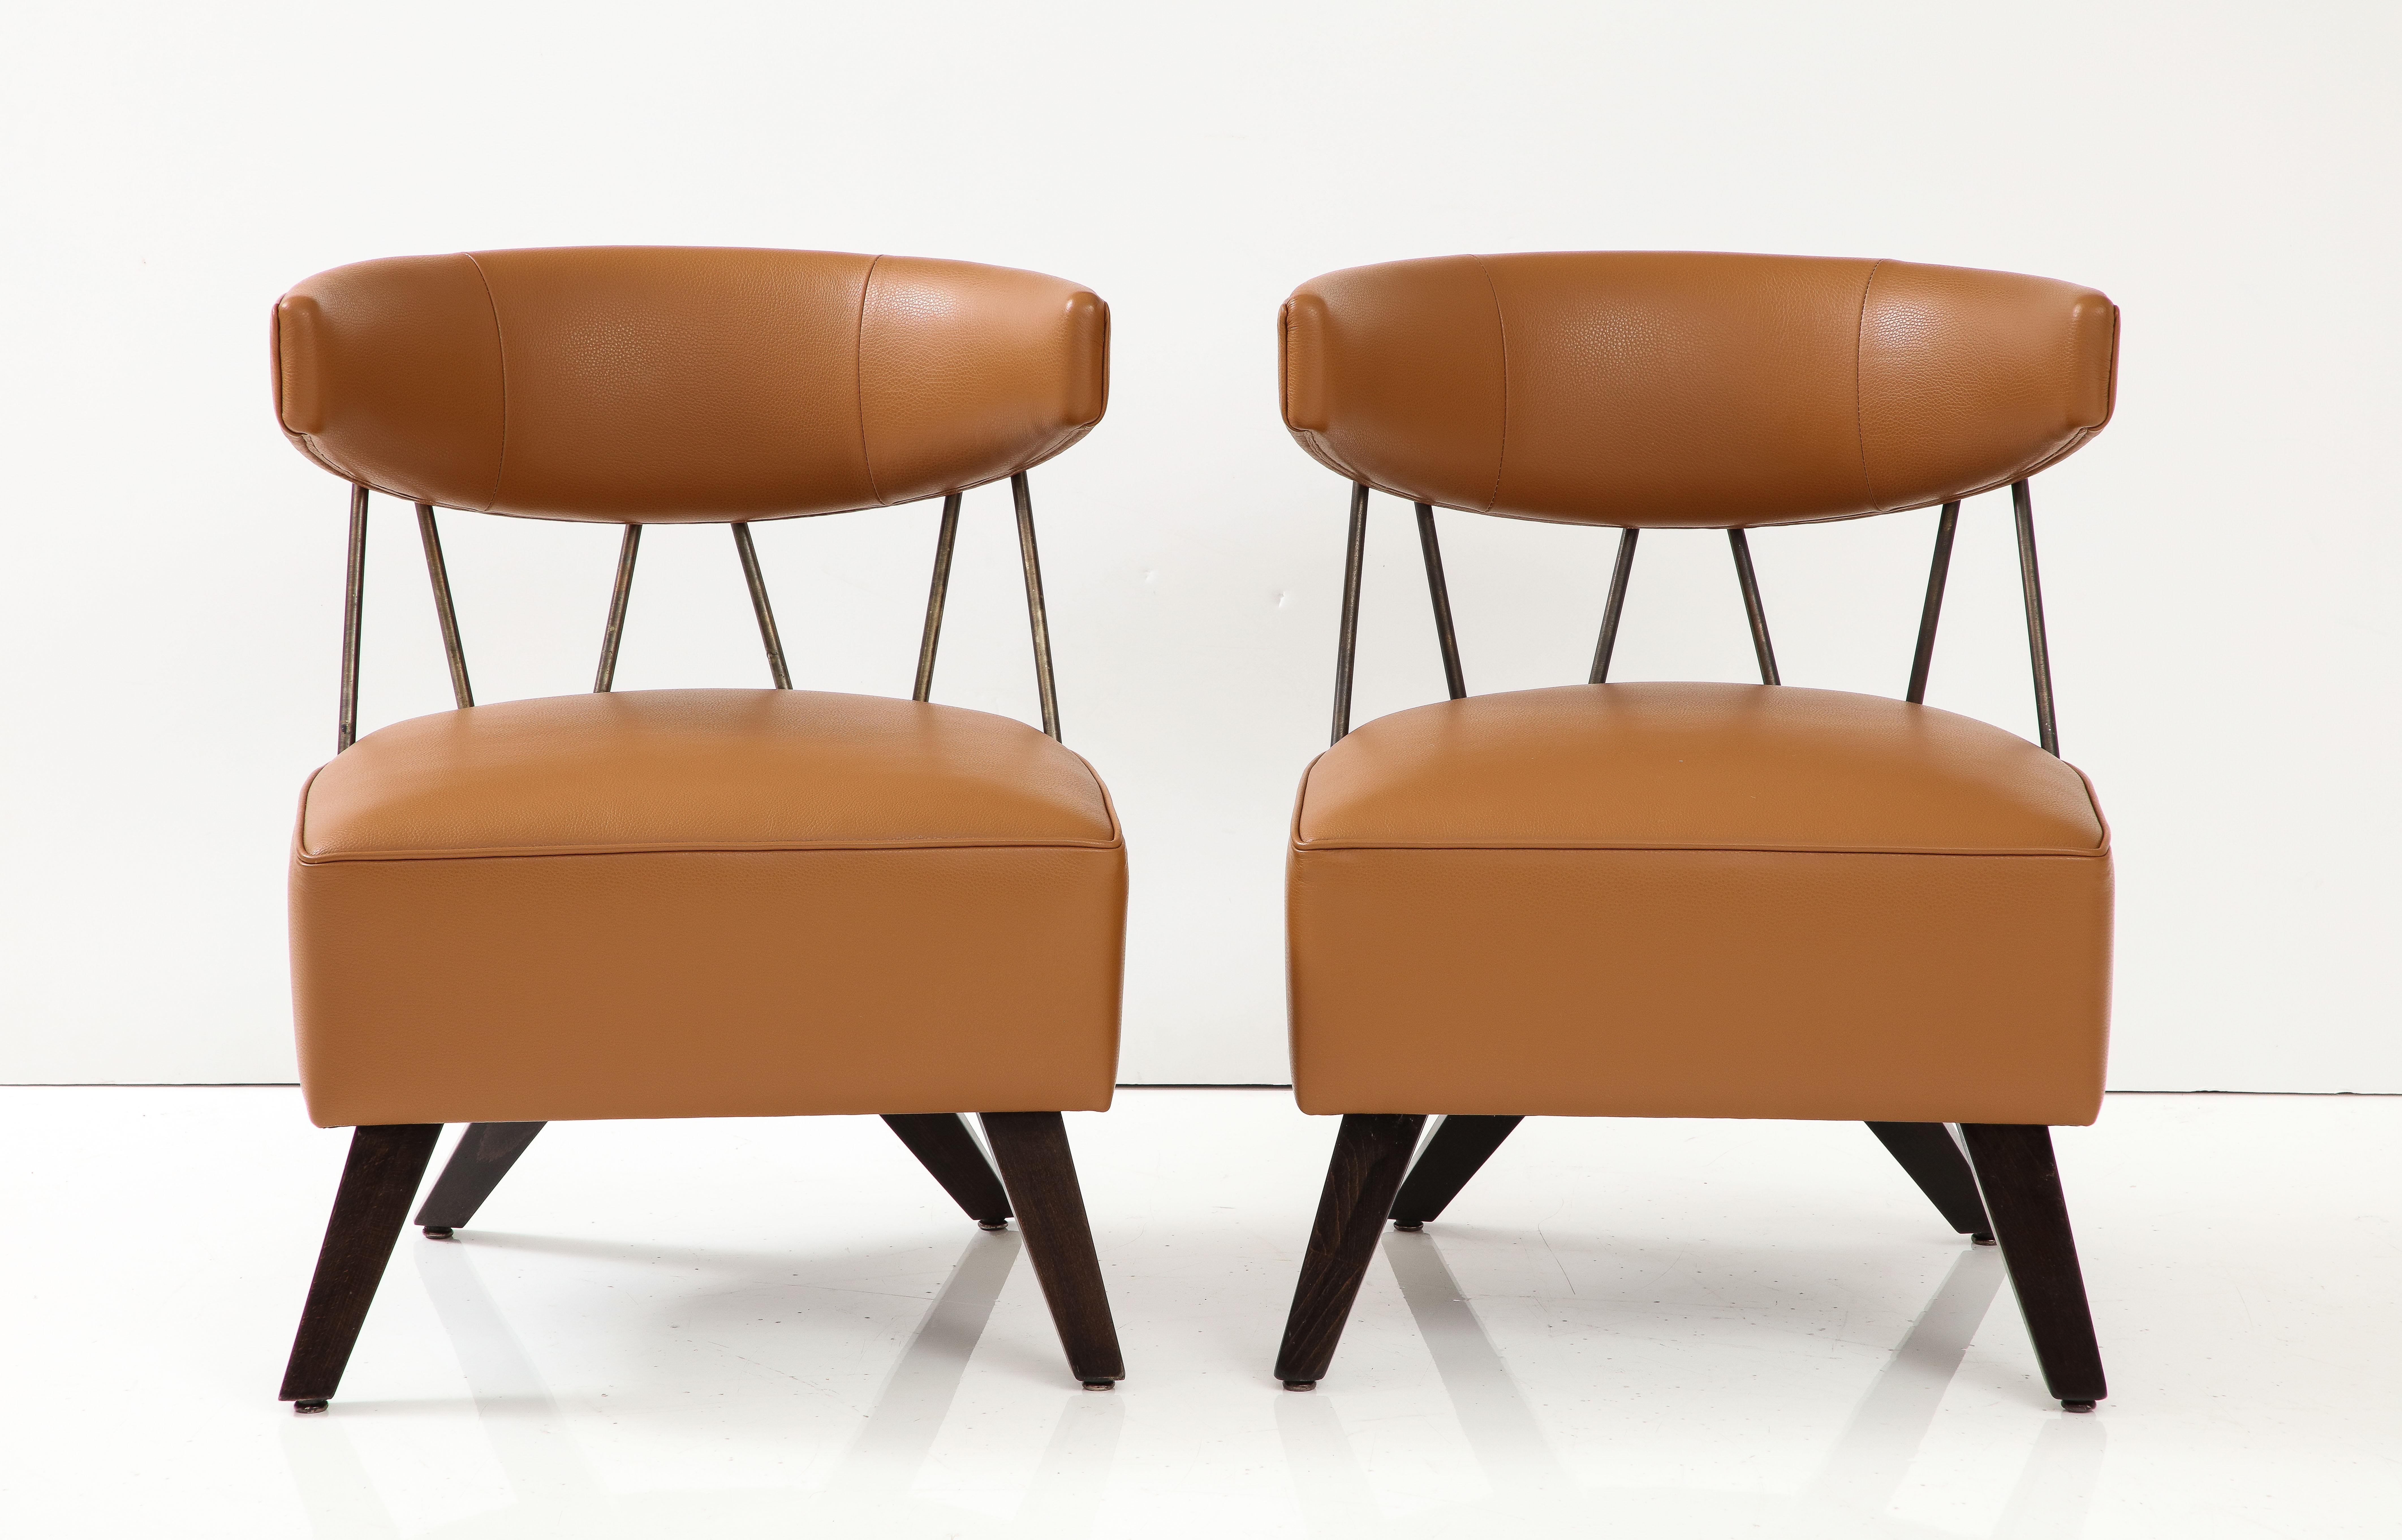 Stunning pair of Klismos inspired chairs attributed to Billy Haines.
The chairs have been Beautifully reupholstered in a Tobacco colored leather,
and are featured in the book 